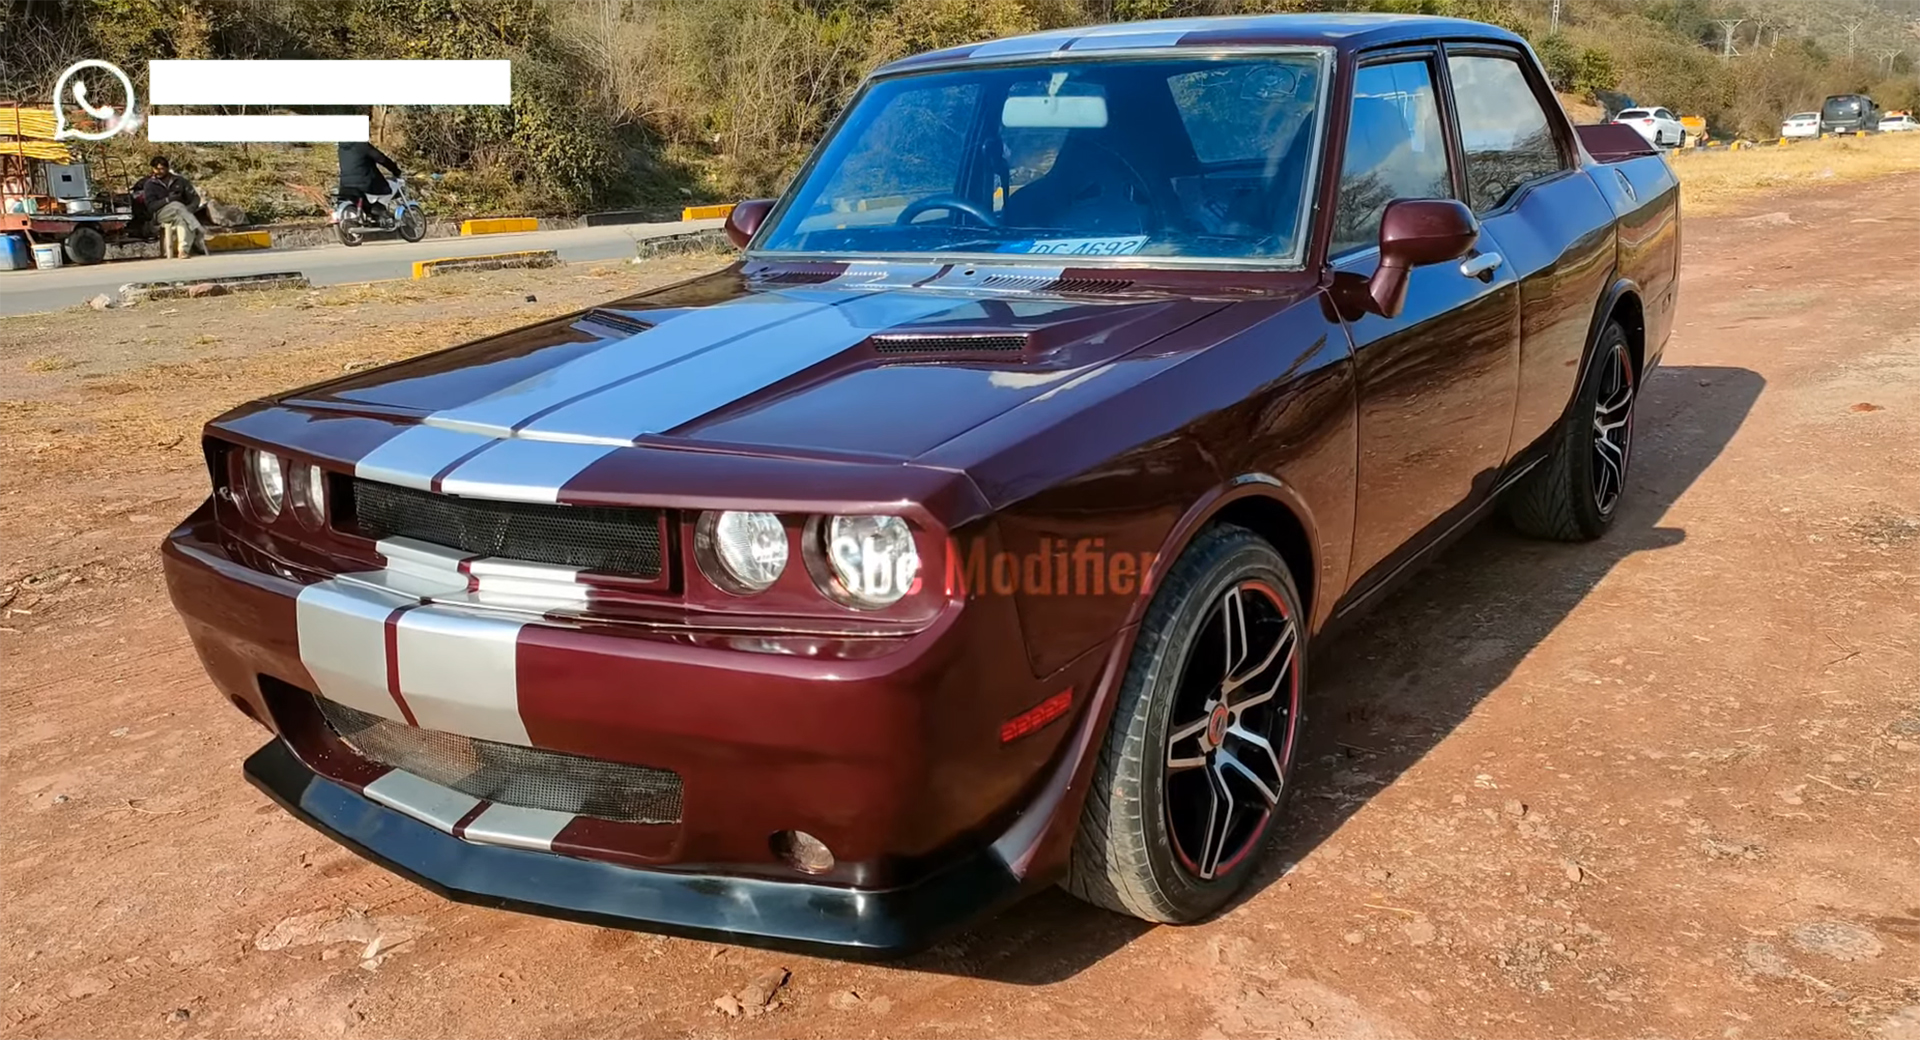 Shop Turns Cheap Toyotas Into Dodge Challengers, Kias Into Ford Mustang